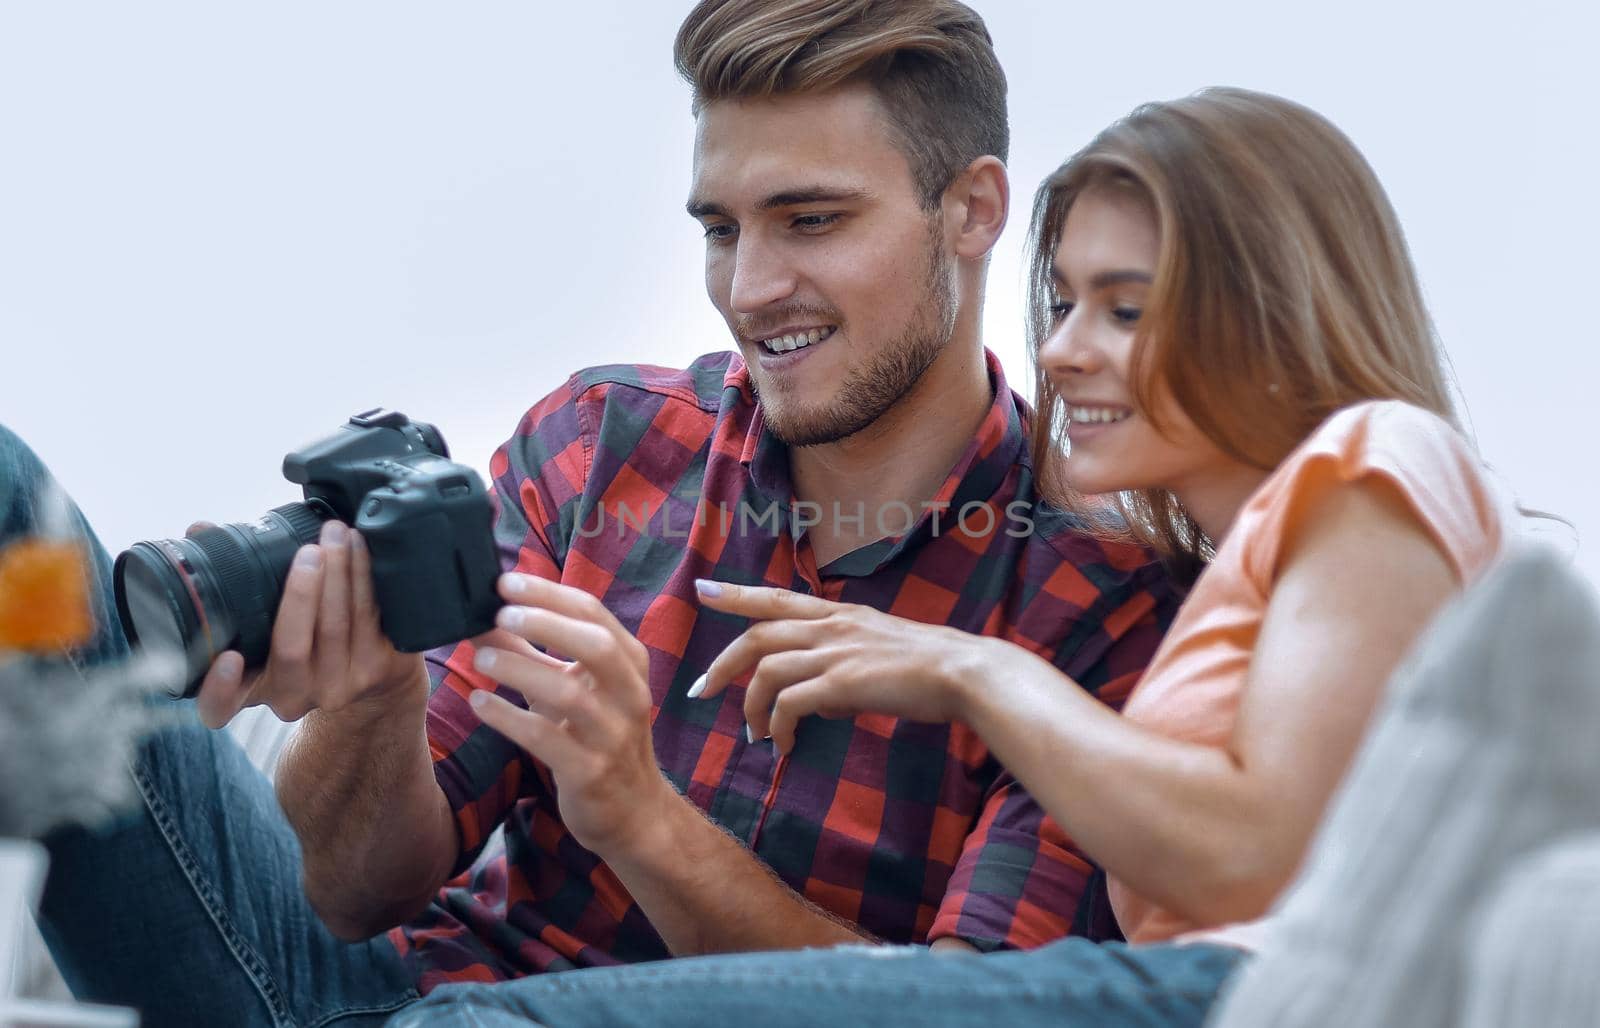 modern young couple checks the photos on the camera. photo blurred background and has copy space.